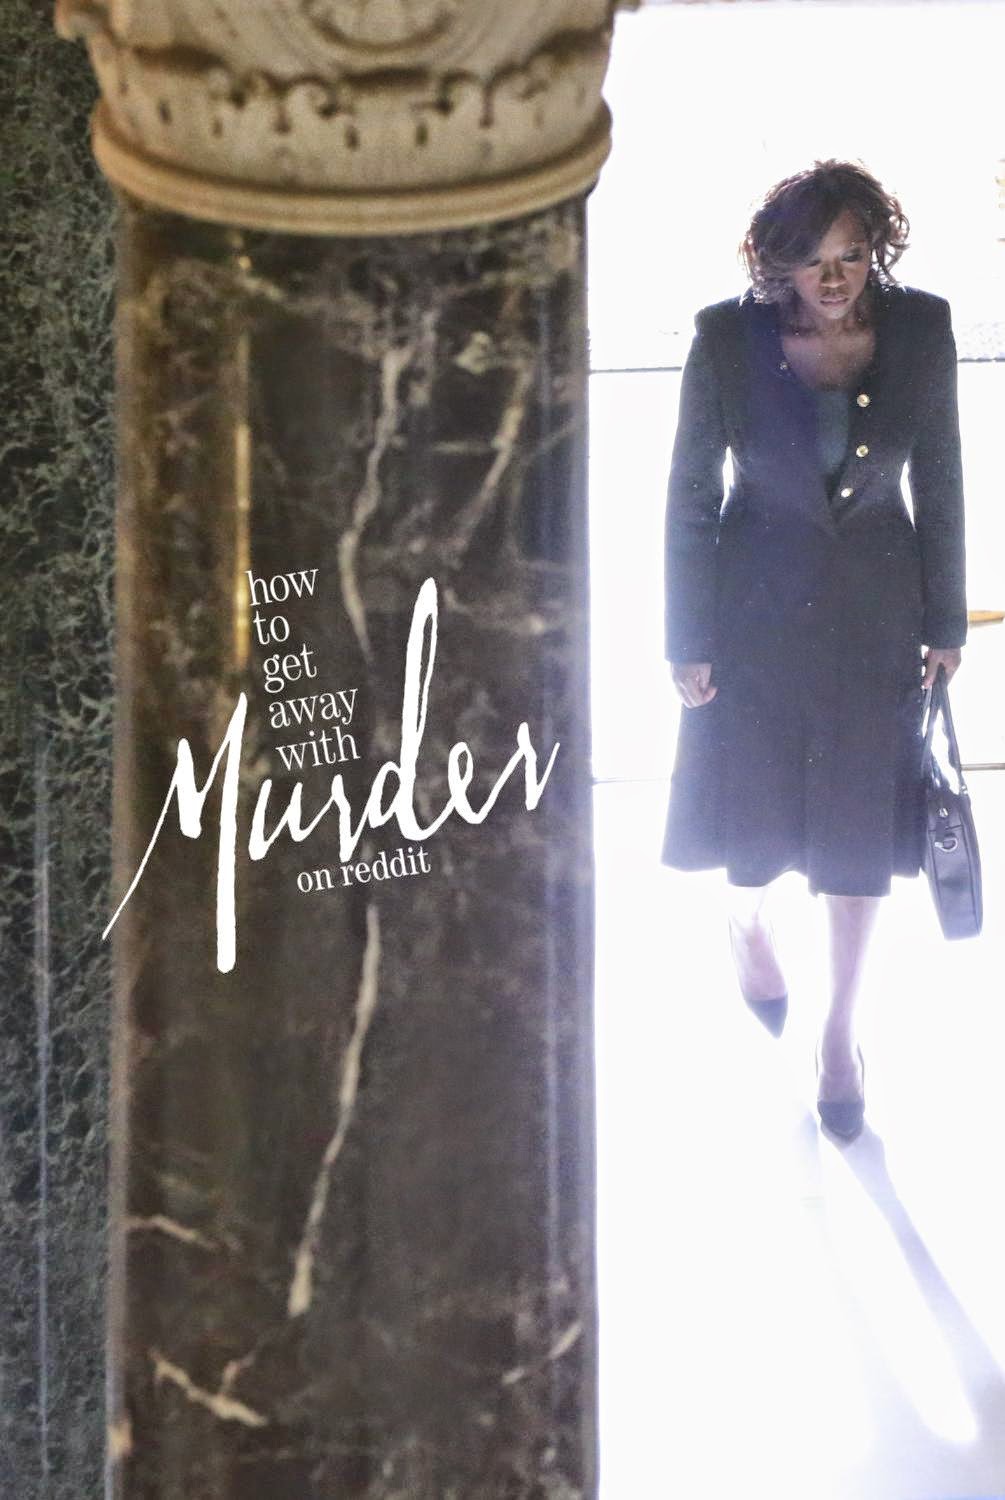 How To Get Away With Murder New Episode Sneak Peak Images